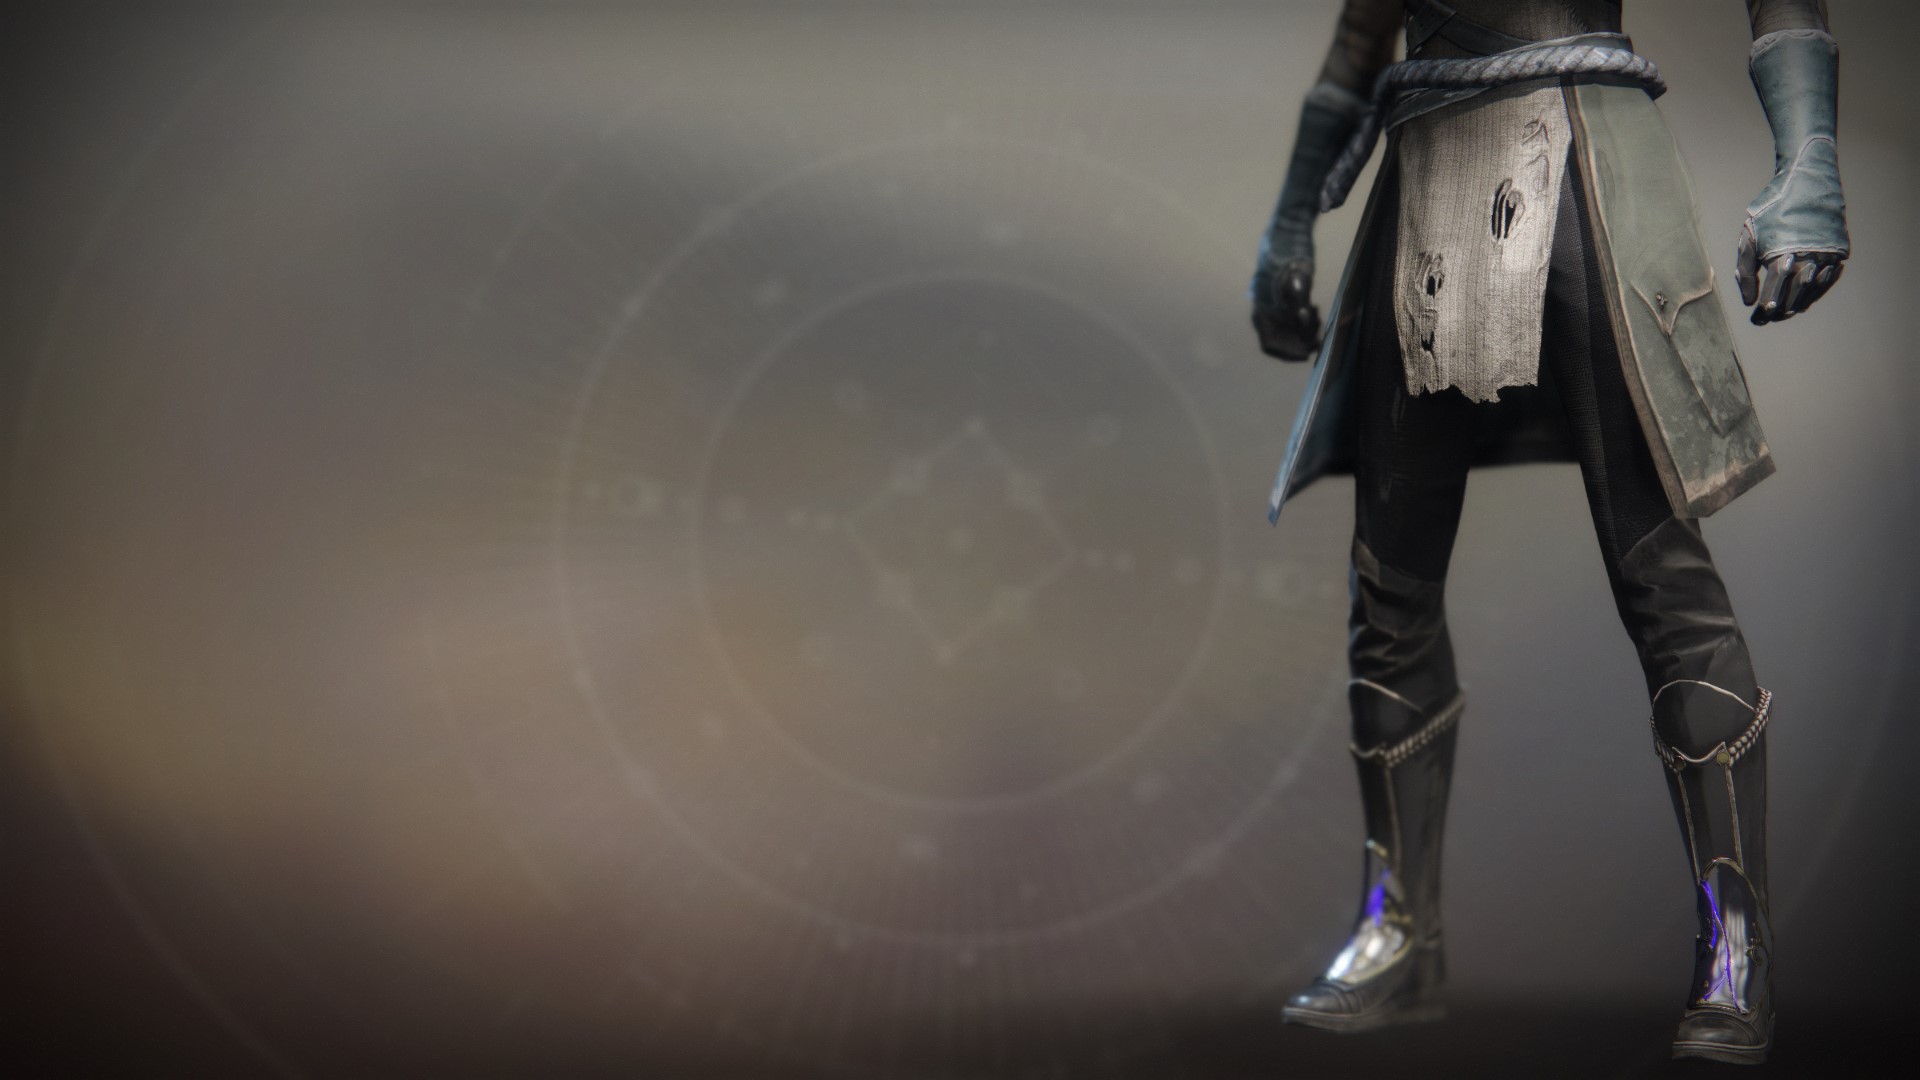 An in-game render of the Solstice Boots (Magnificent).